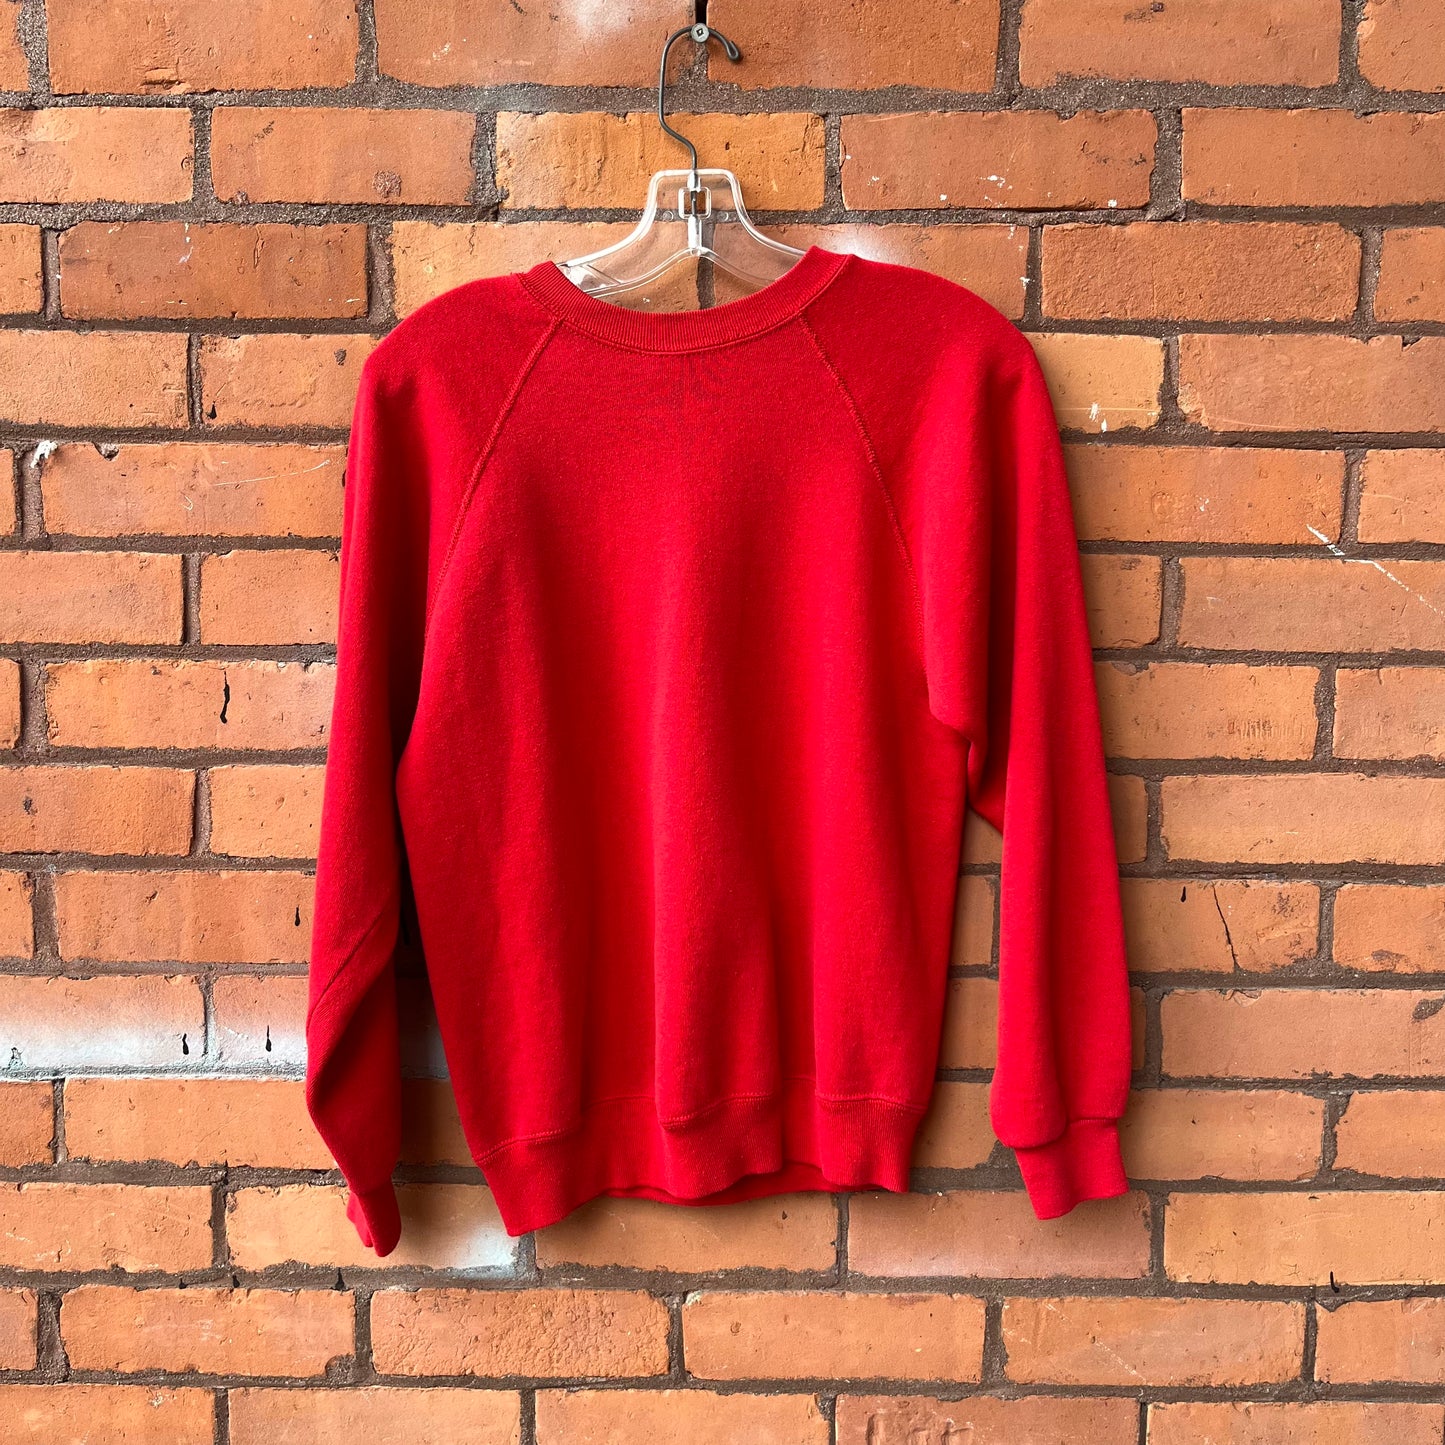 90’s Vintage Chicago Bulls Red Crewneck Sweater / Size S